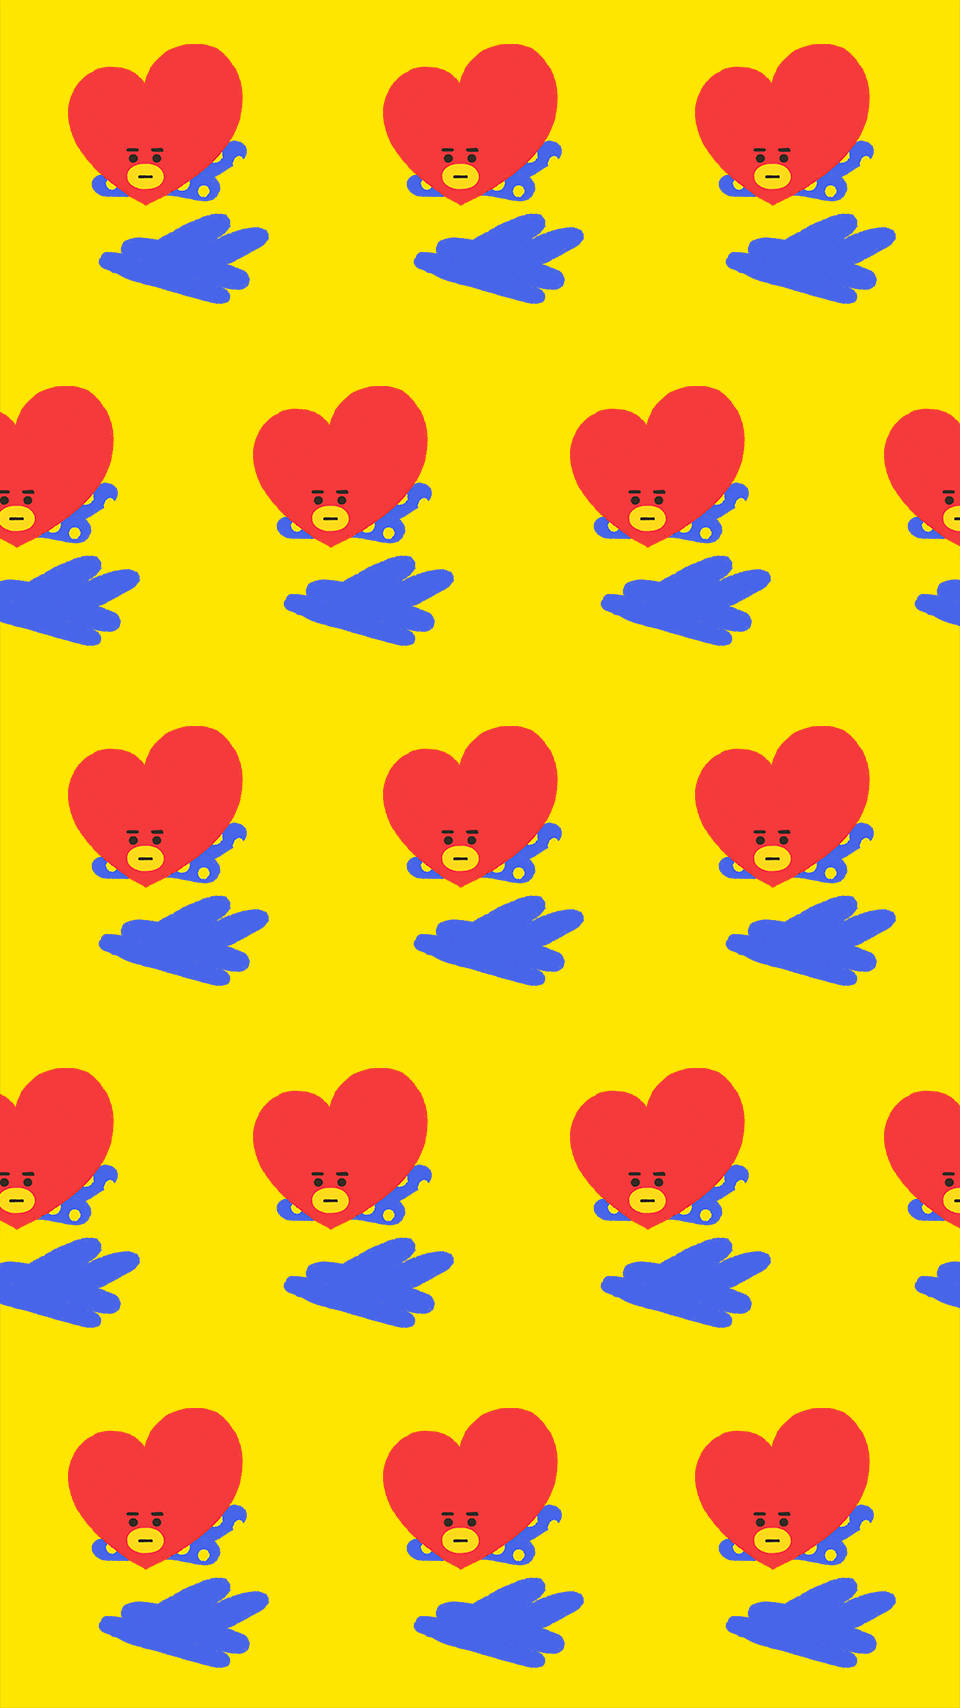 Brighten up your day with Bt21's cute and cheerful Tata pattern in Yellow! Wallpaper